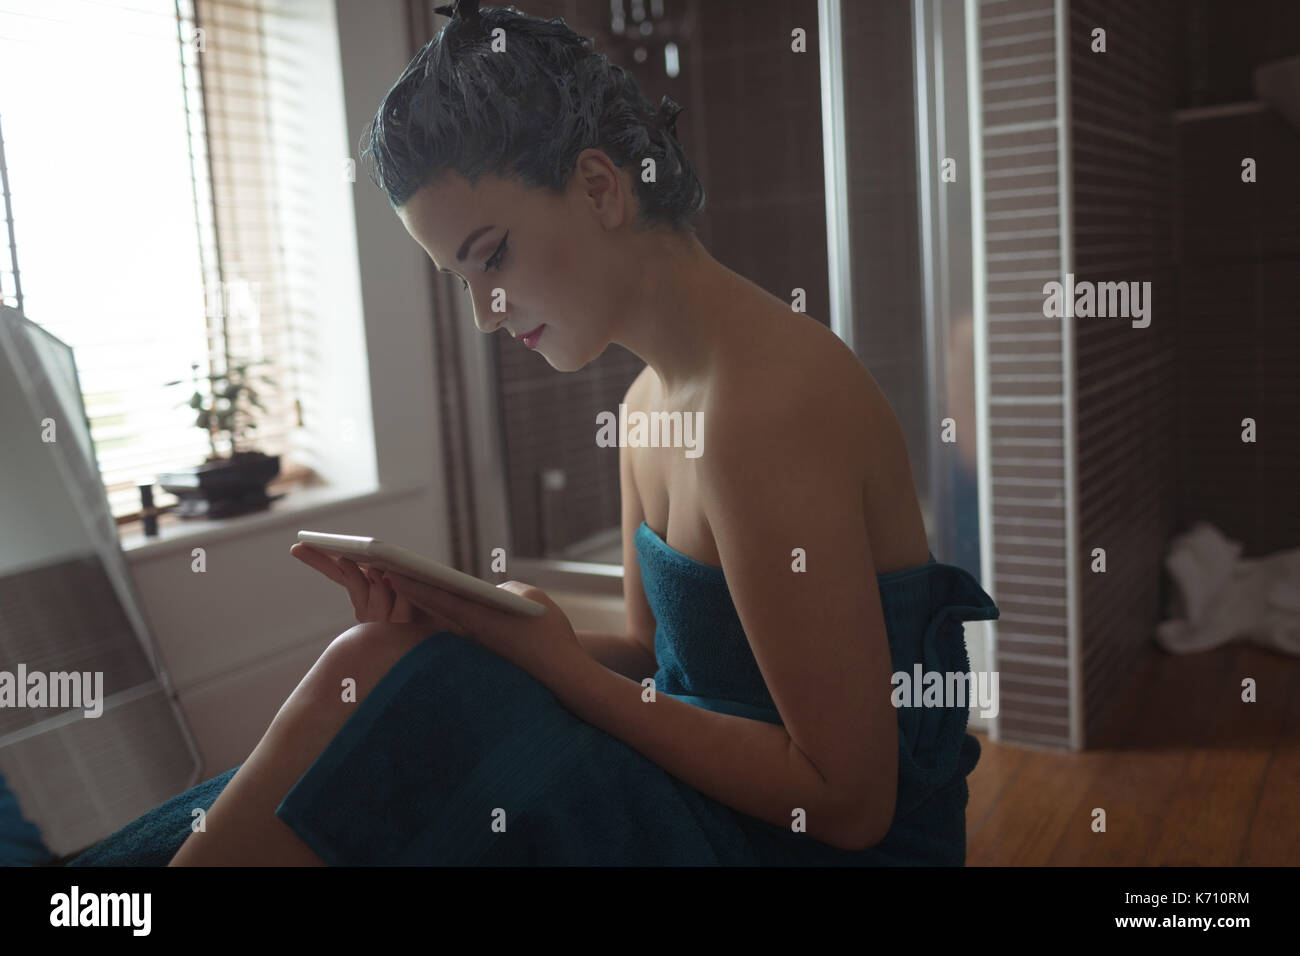 Young woman using digital tablet in bathroom at home Stock Photo